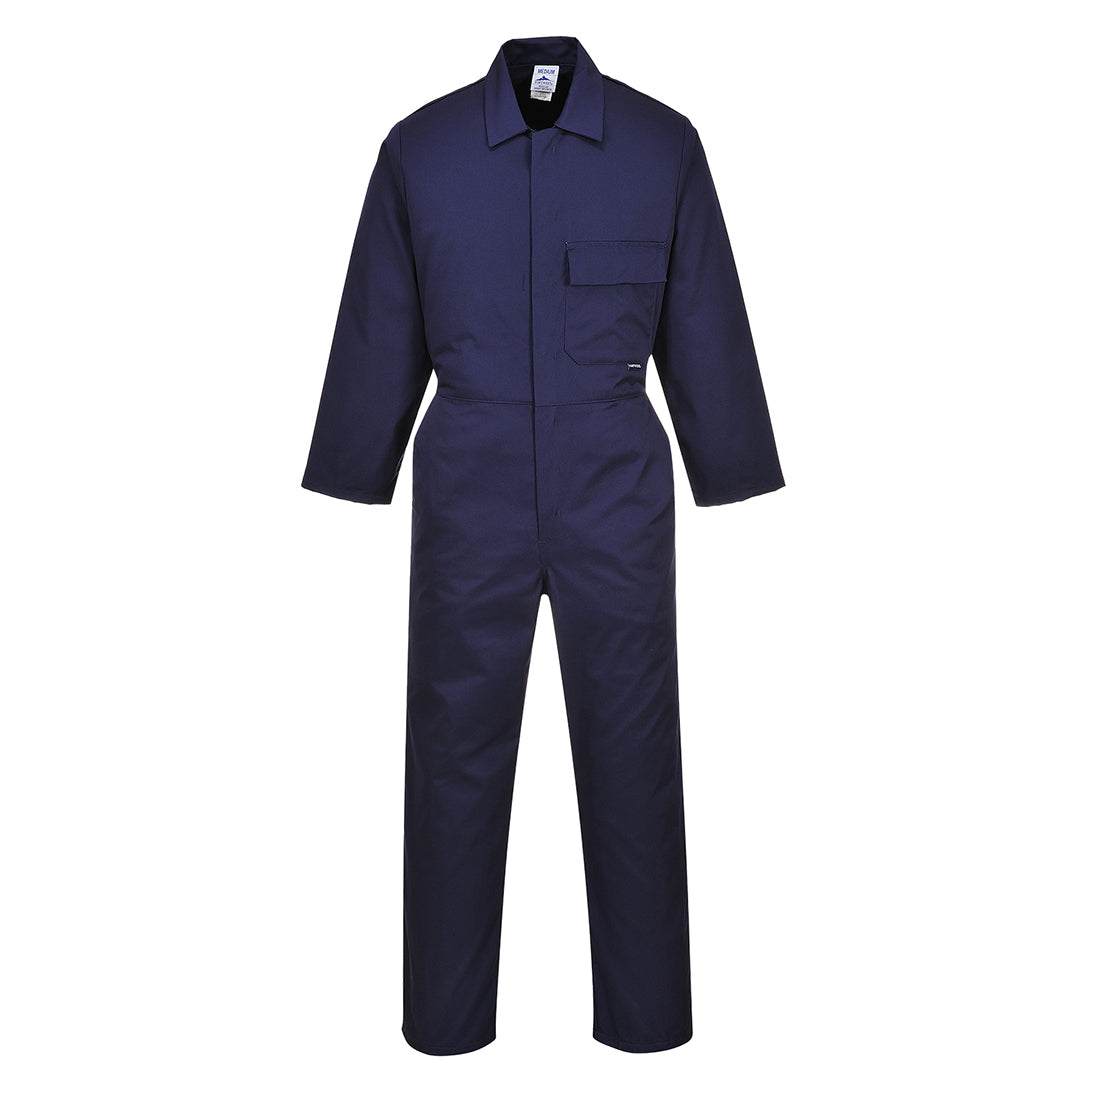 Portwest 2802 - Navy T Standard Coverall boiler suit sz Large Tall